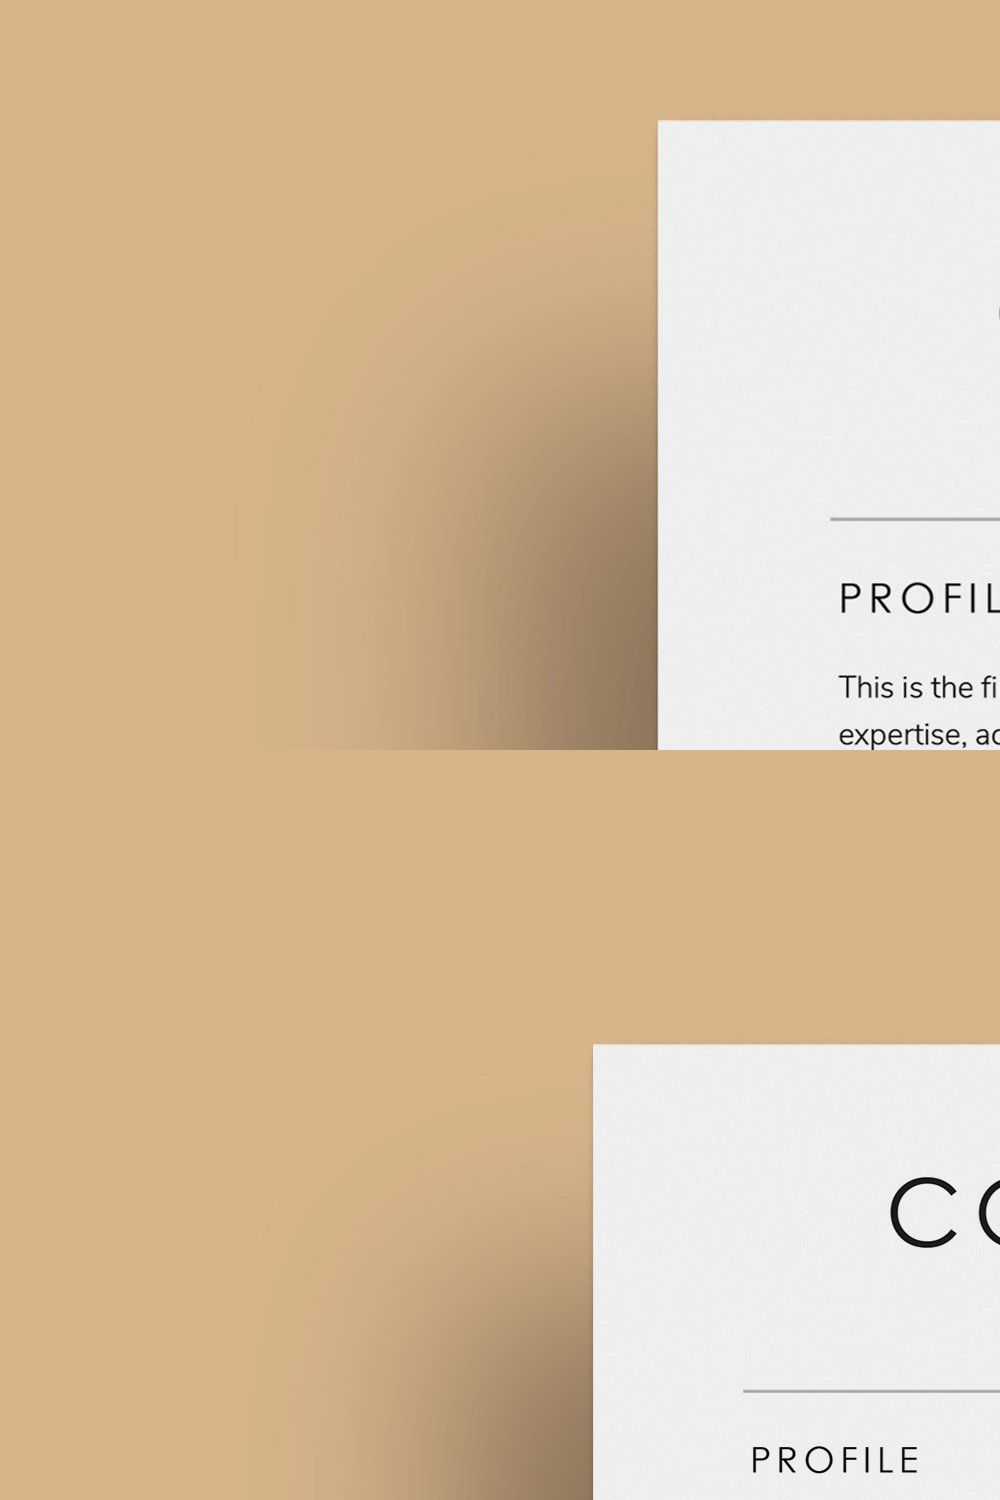 Resume/CV - The Courtney pinterest preview image.